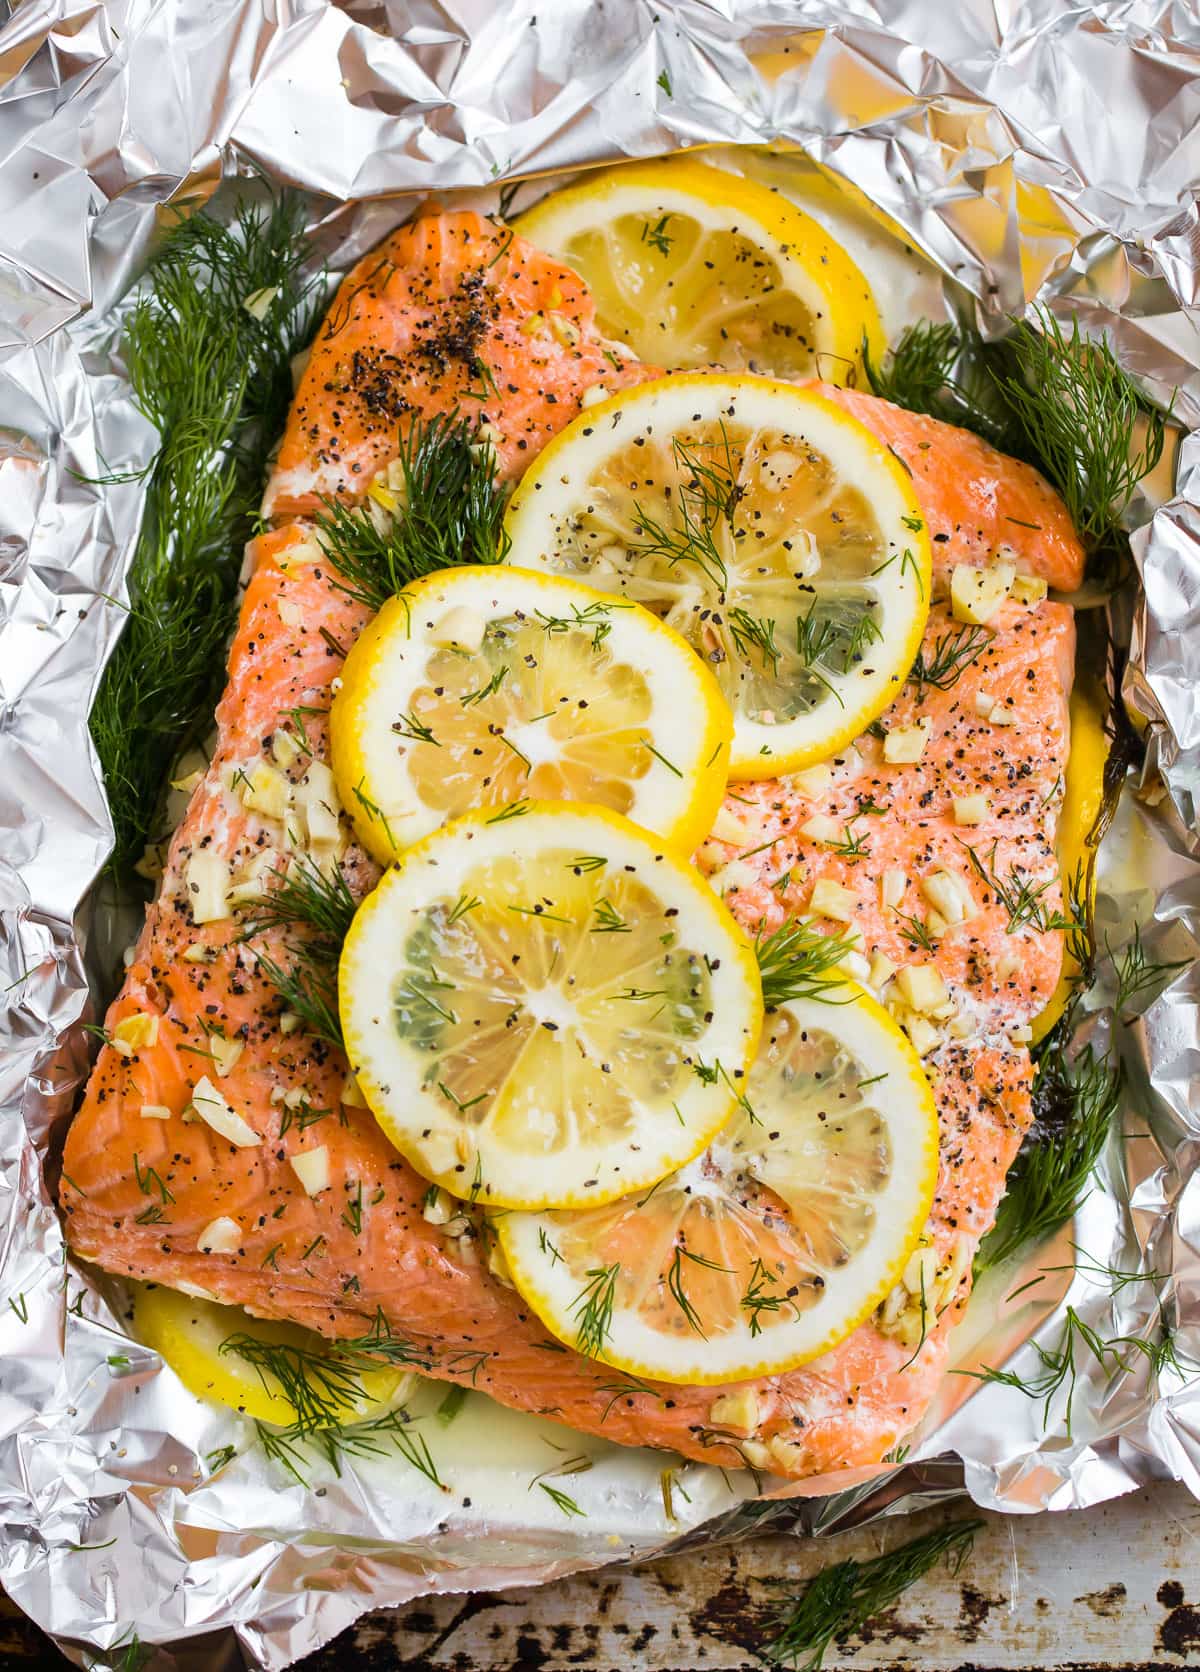 Perfect Grilled Salmon